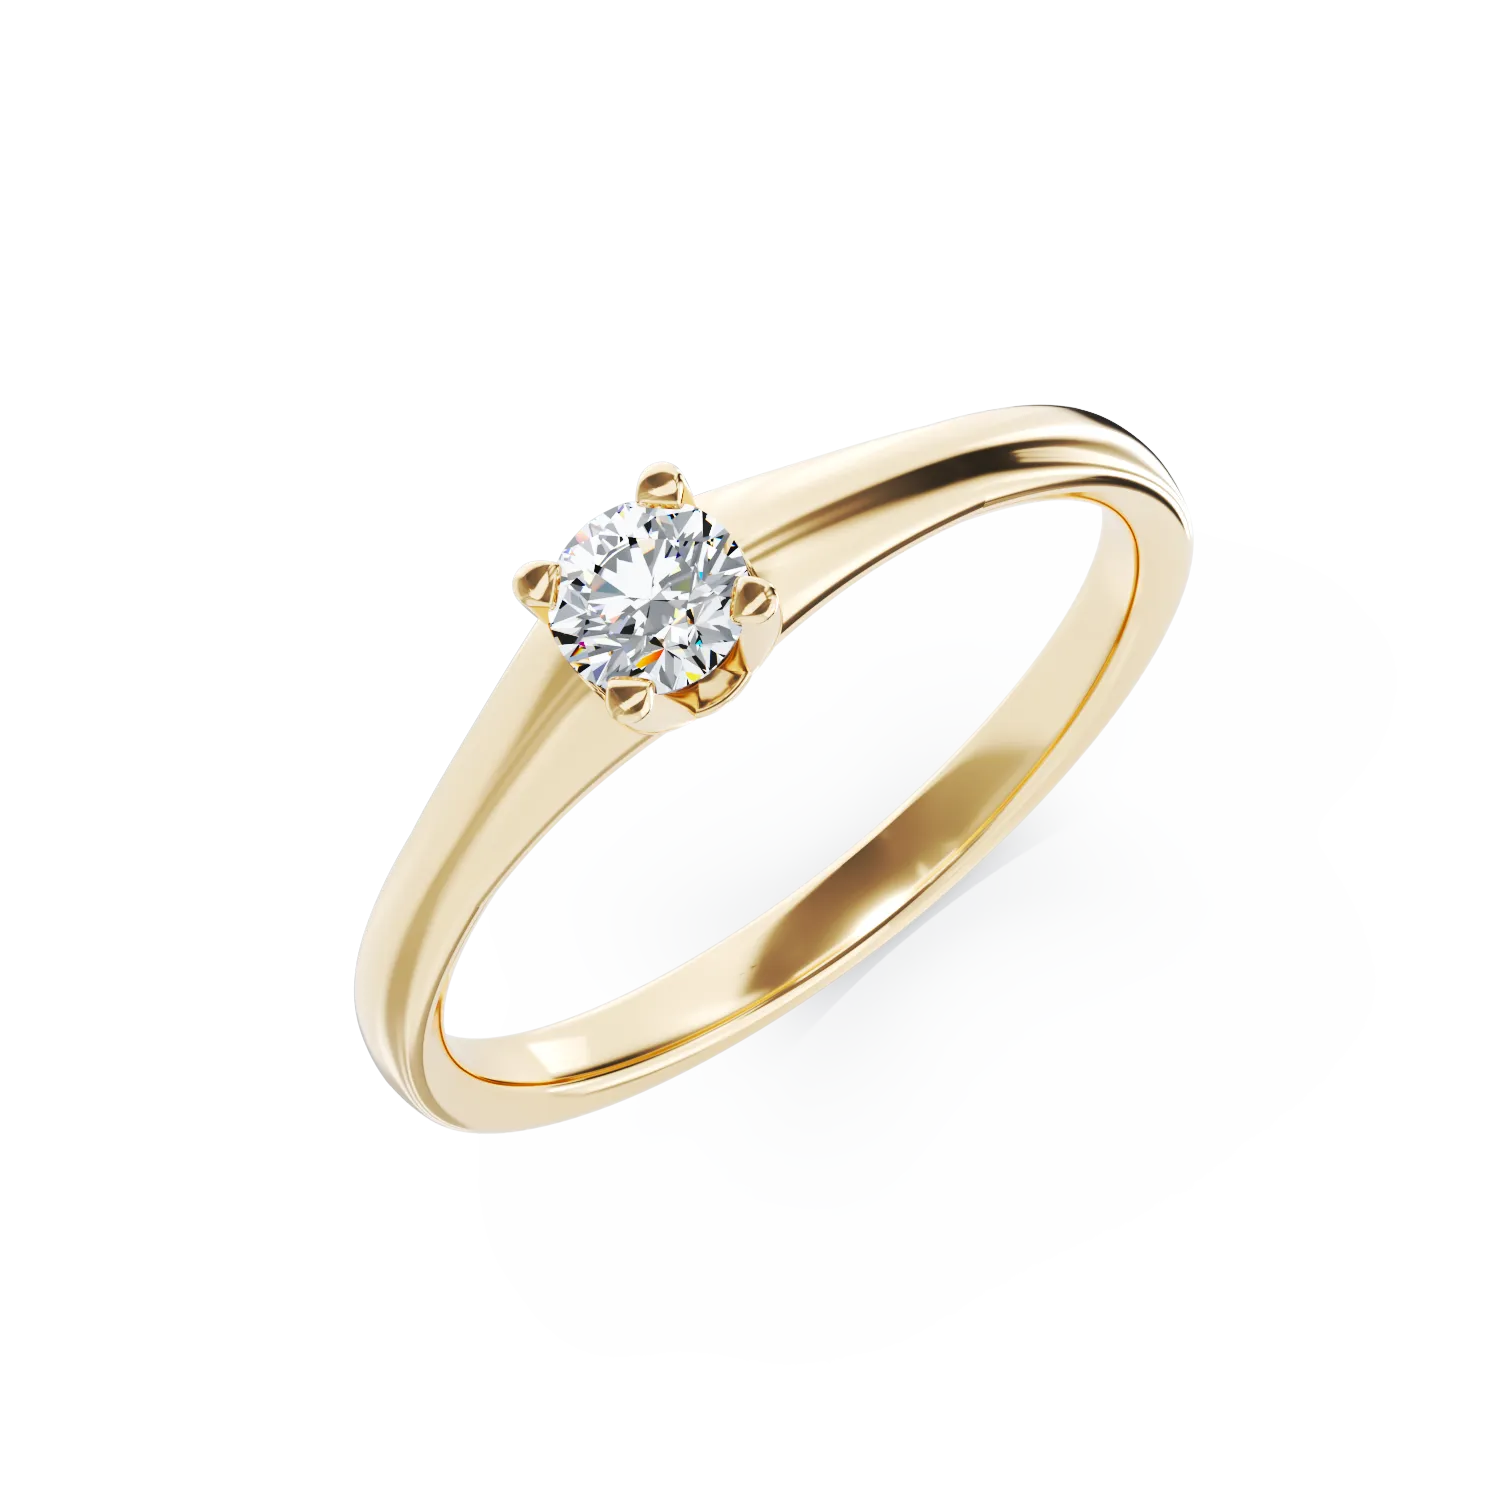 18K yellow gold engagement ring with a 0.1ct solitaire diamond